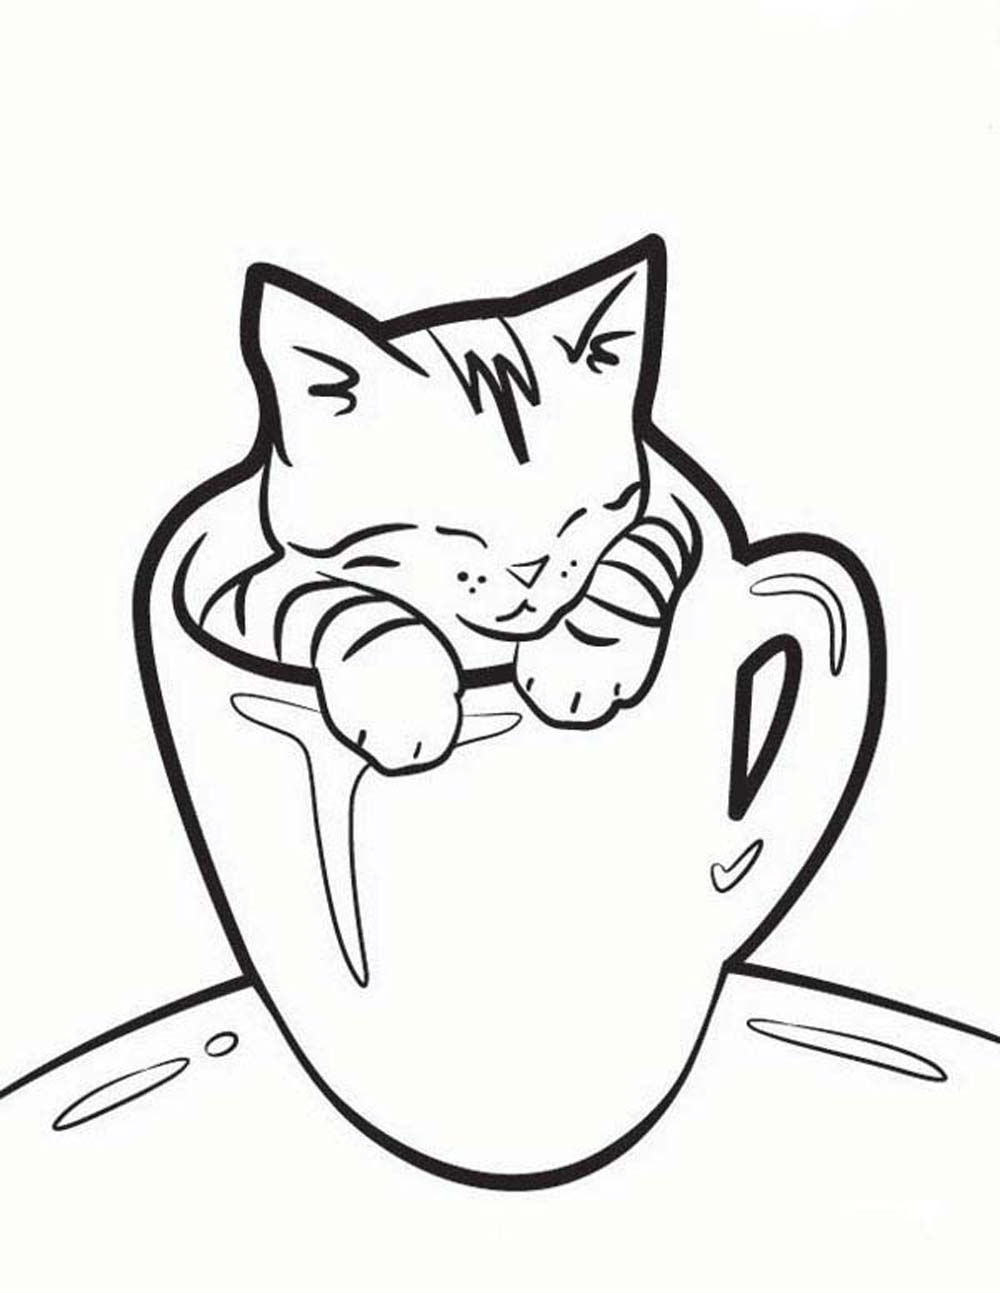 kitten-coloring-pages-cat-and-dog-coloring-pages-to-download-and